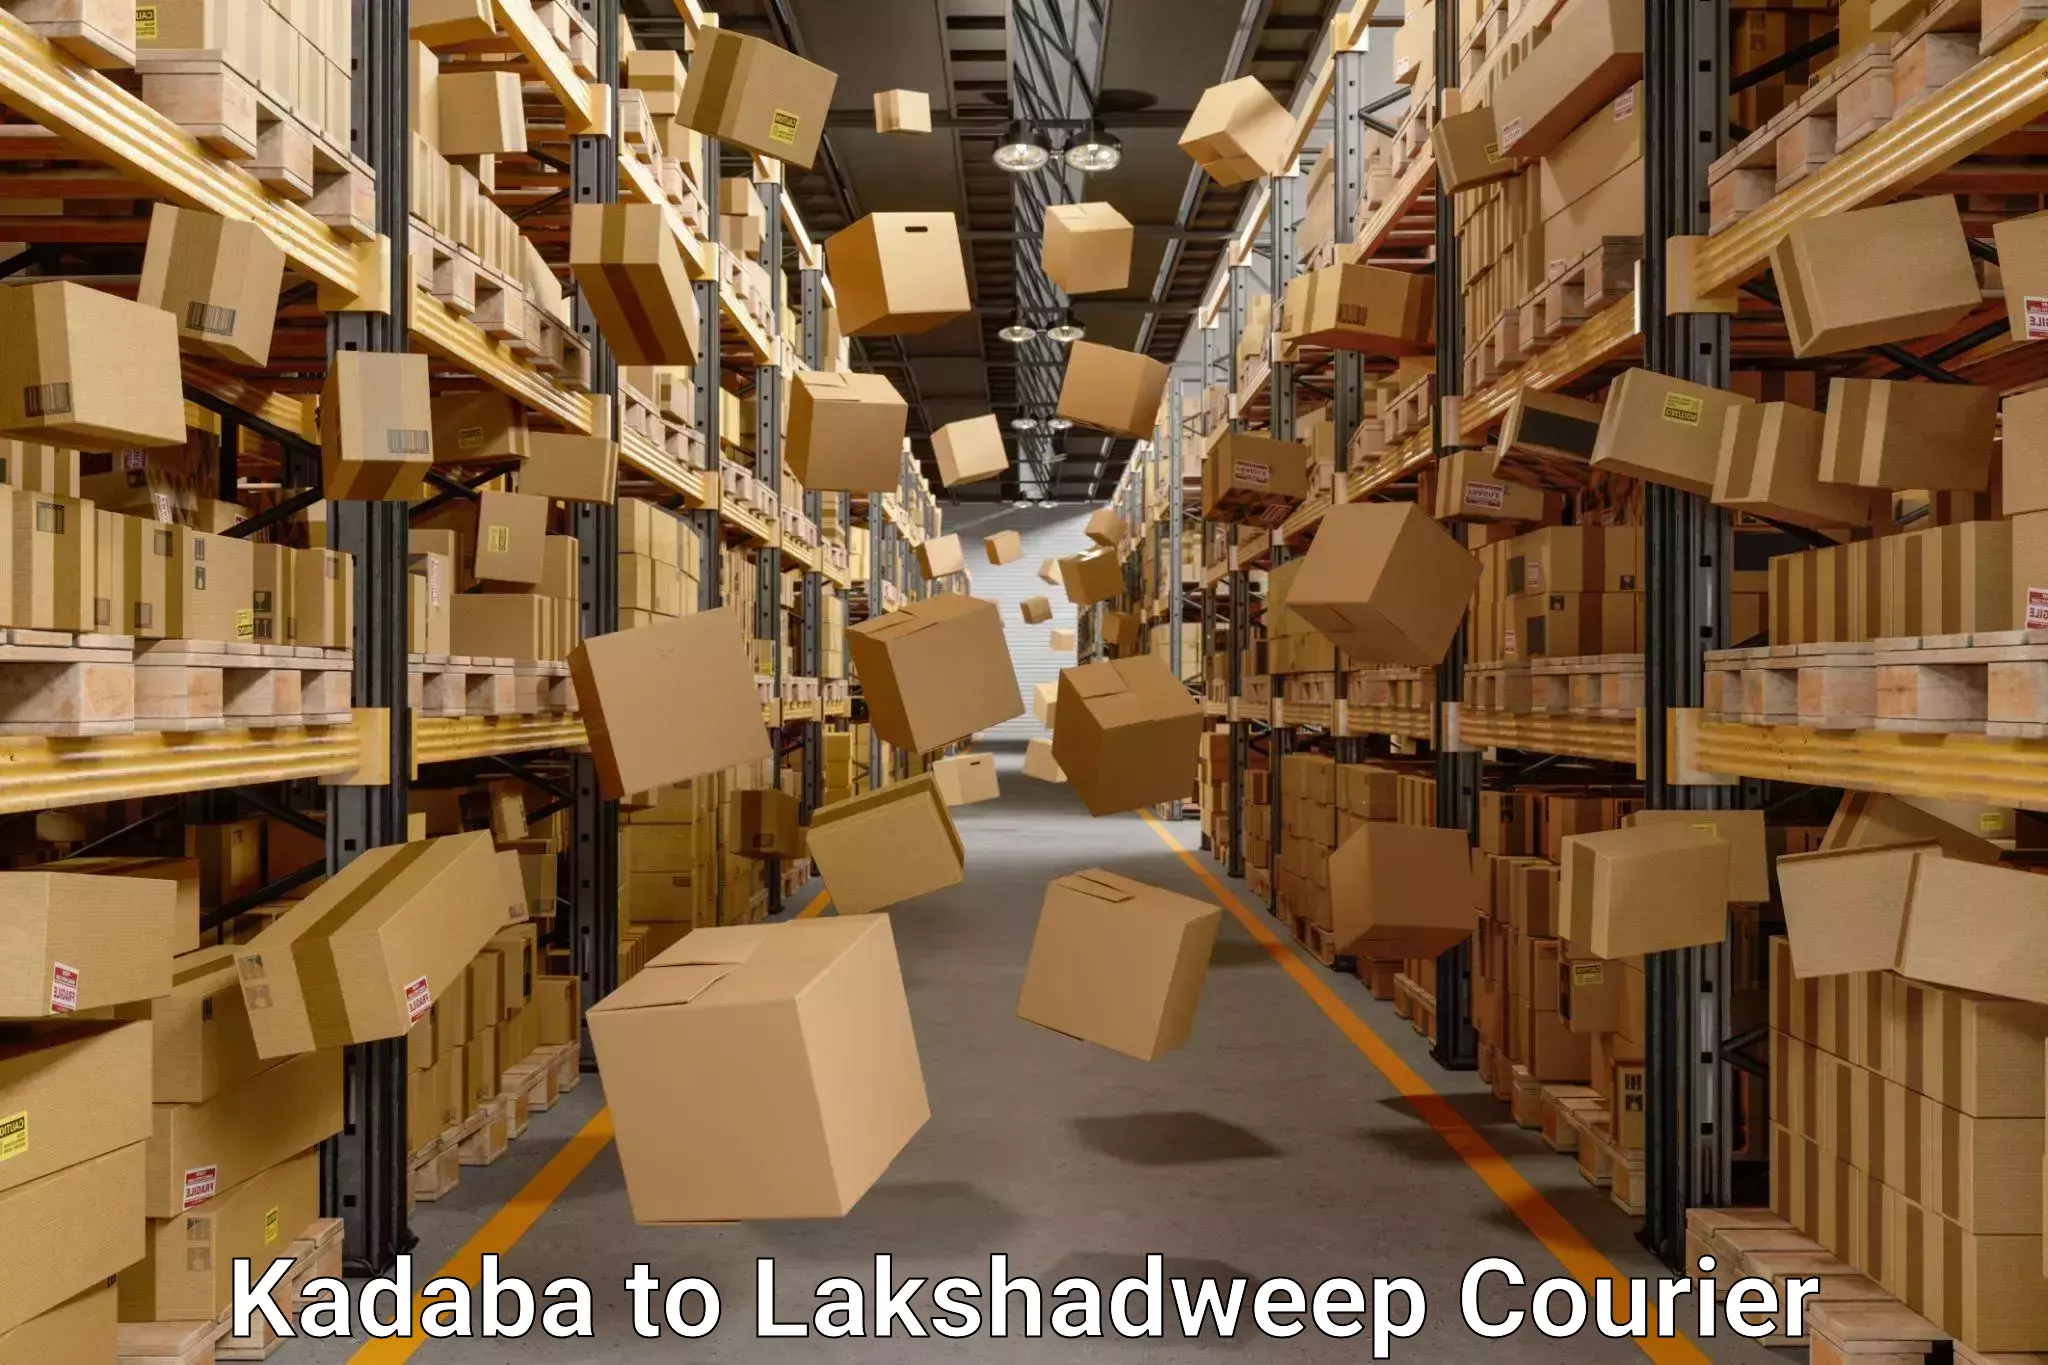 Quality relocation assistance Kadaba to Lakshadweep